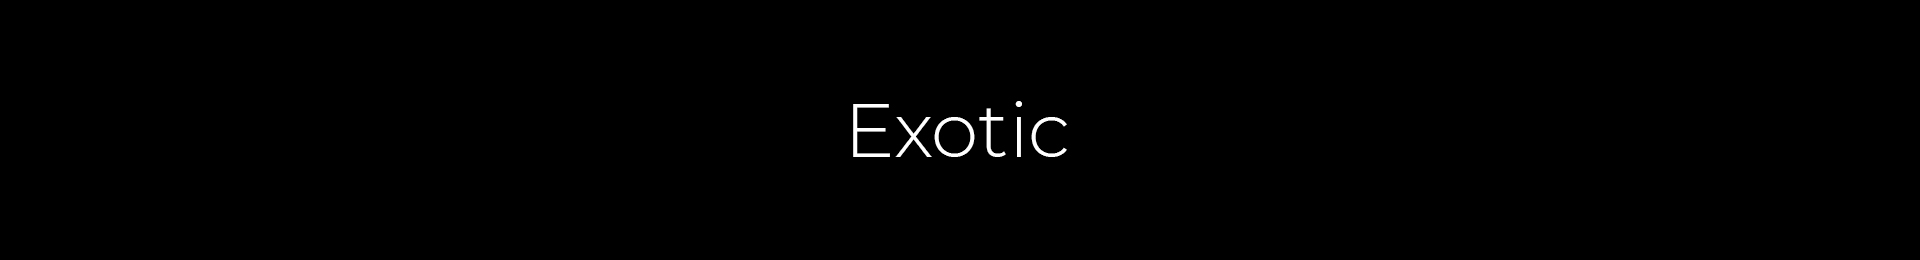 Exotic banner